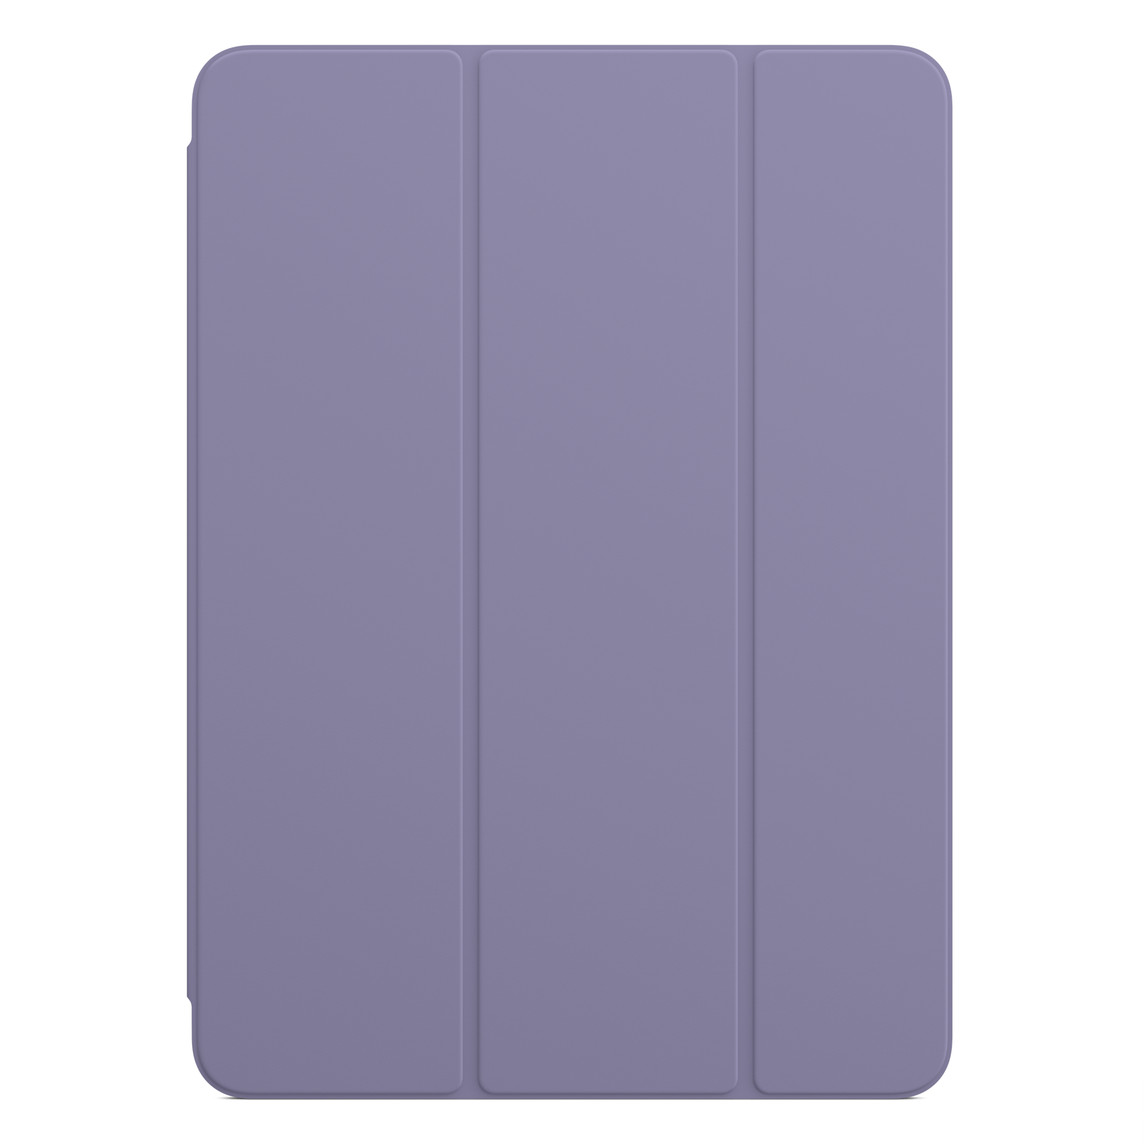 Picture of Apple Smart Folio for 11-inch iPad Pro (4th generation) - English Lavender